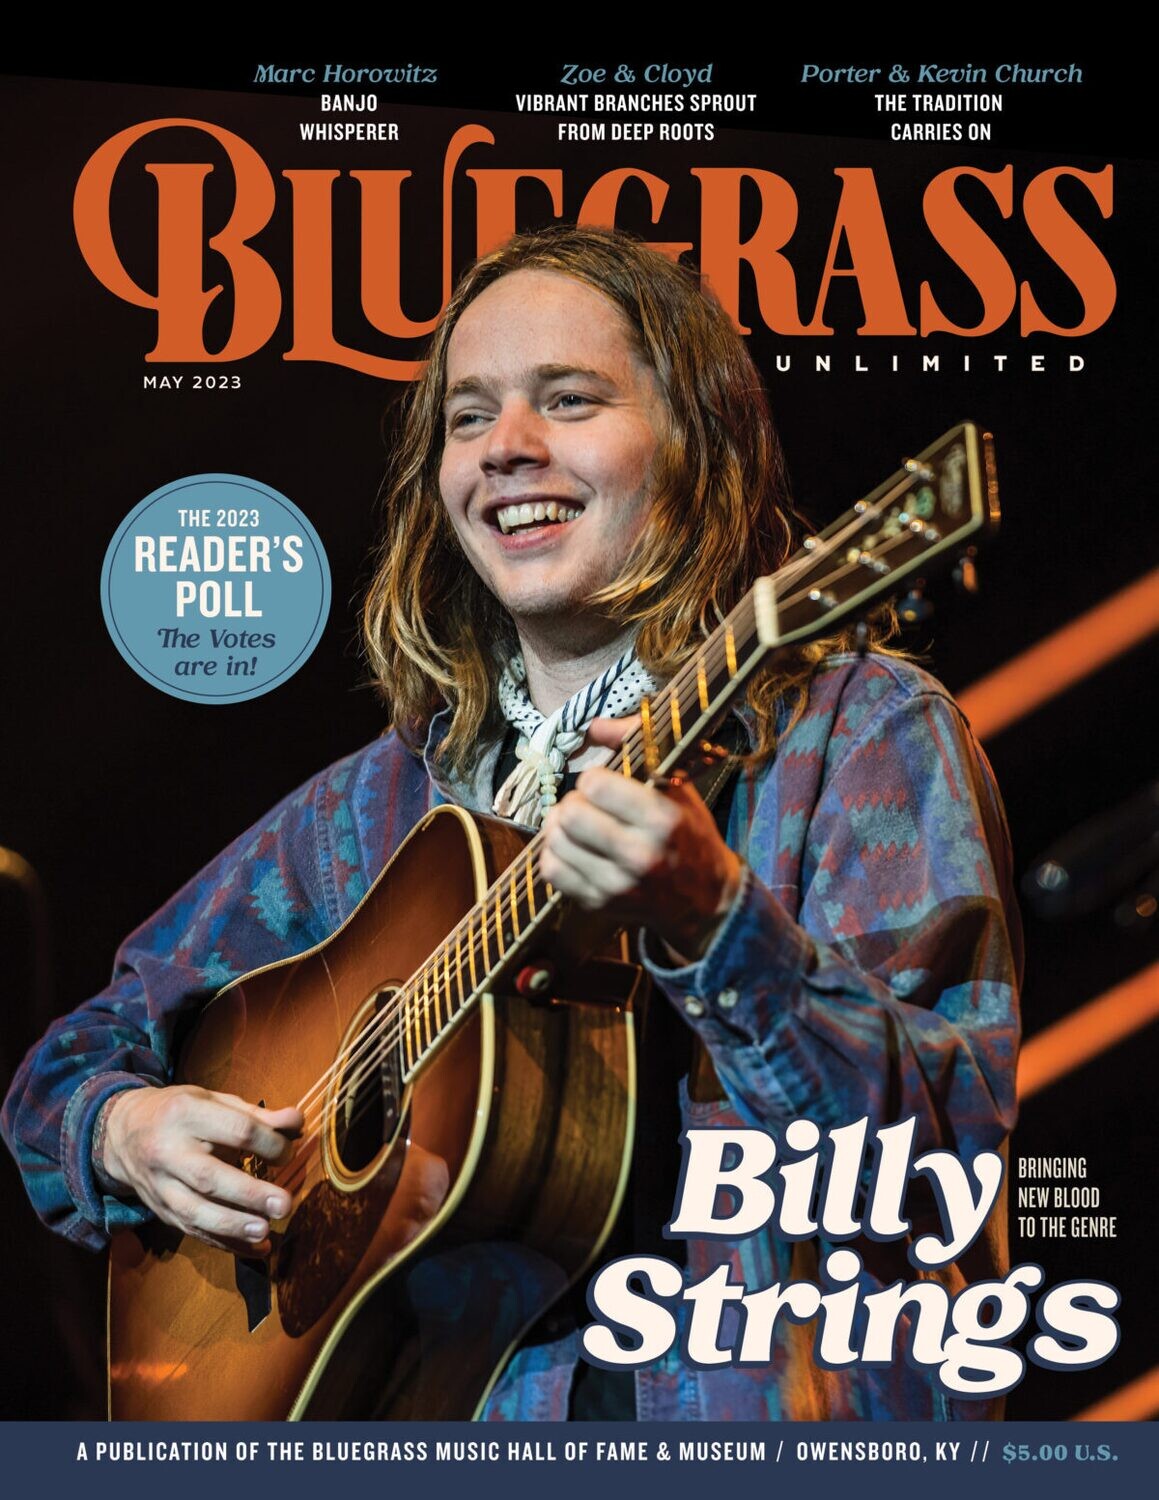 May 2023 Bluegrass Unlimited - Billy Strings